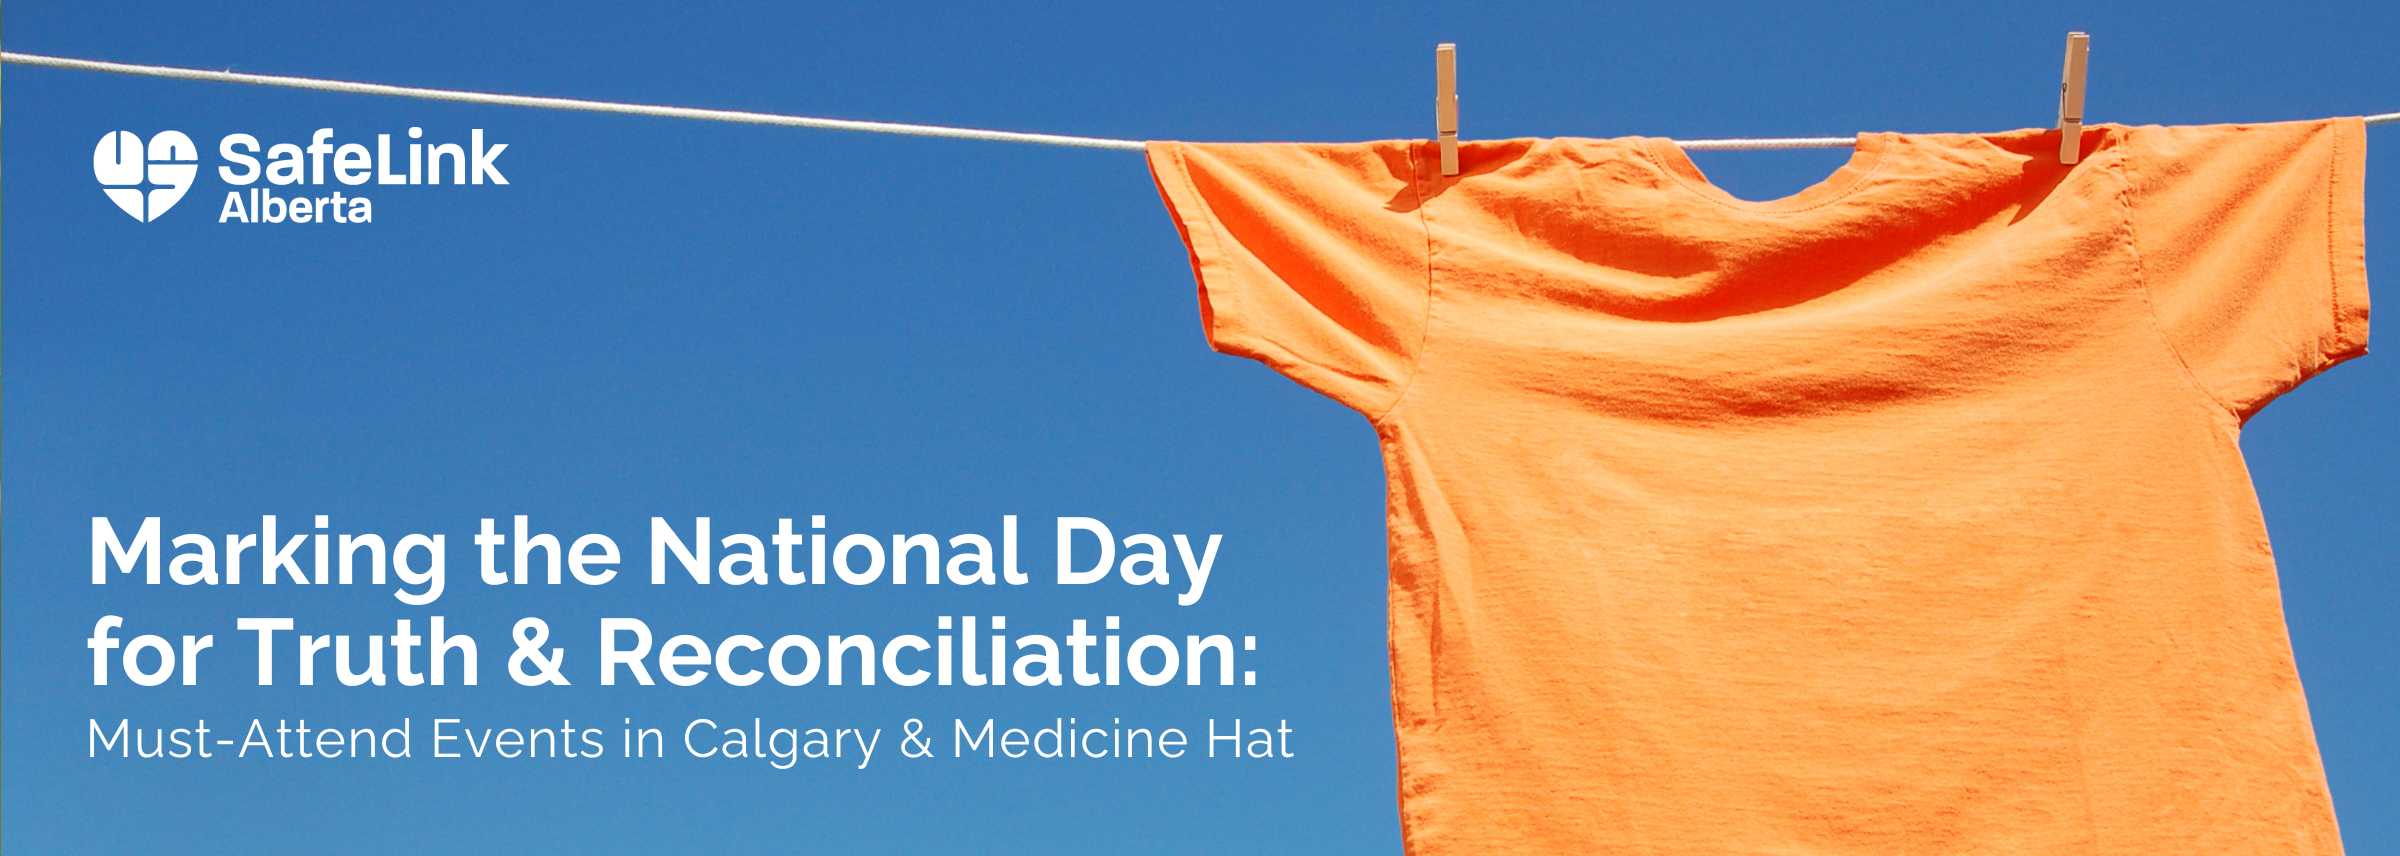 Featured image for “Marking the National Day for Truth & Reconciliation: Must-Attend Events in Calgary & Medicine Hat”